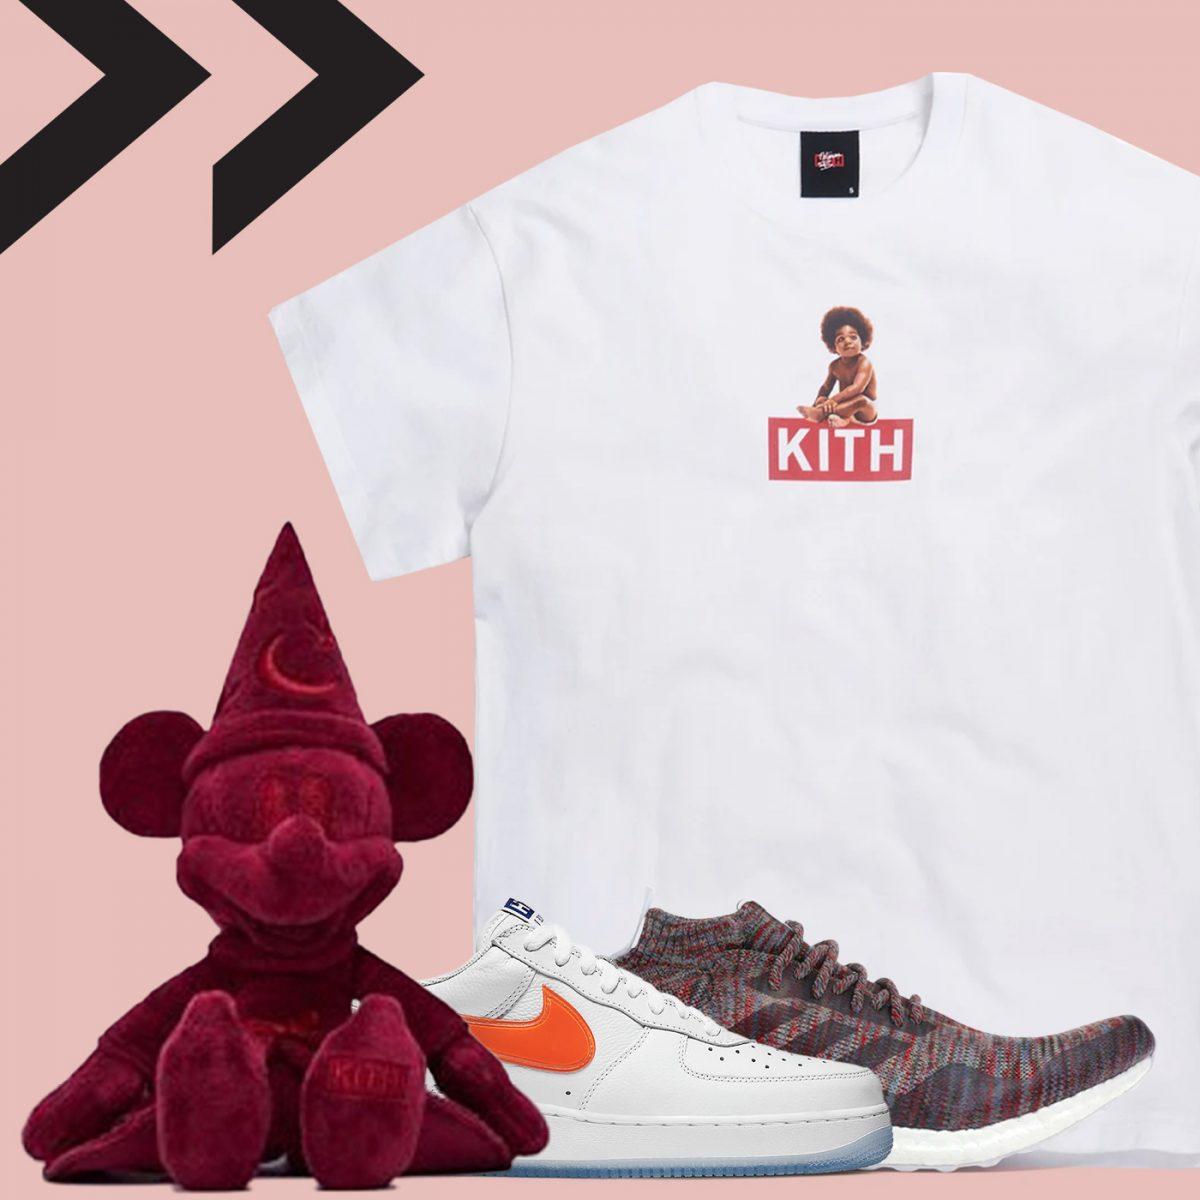 Here's a Look at Kith and Nike's New York Knicks Collection